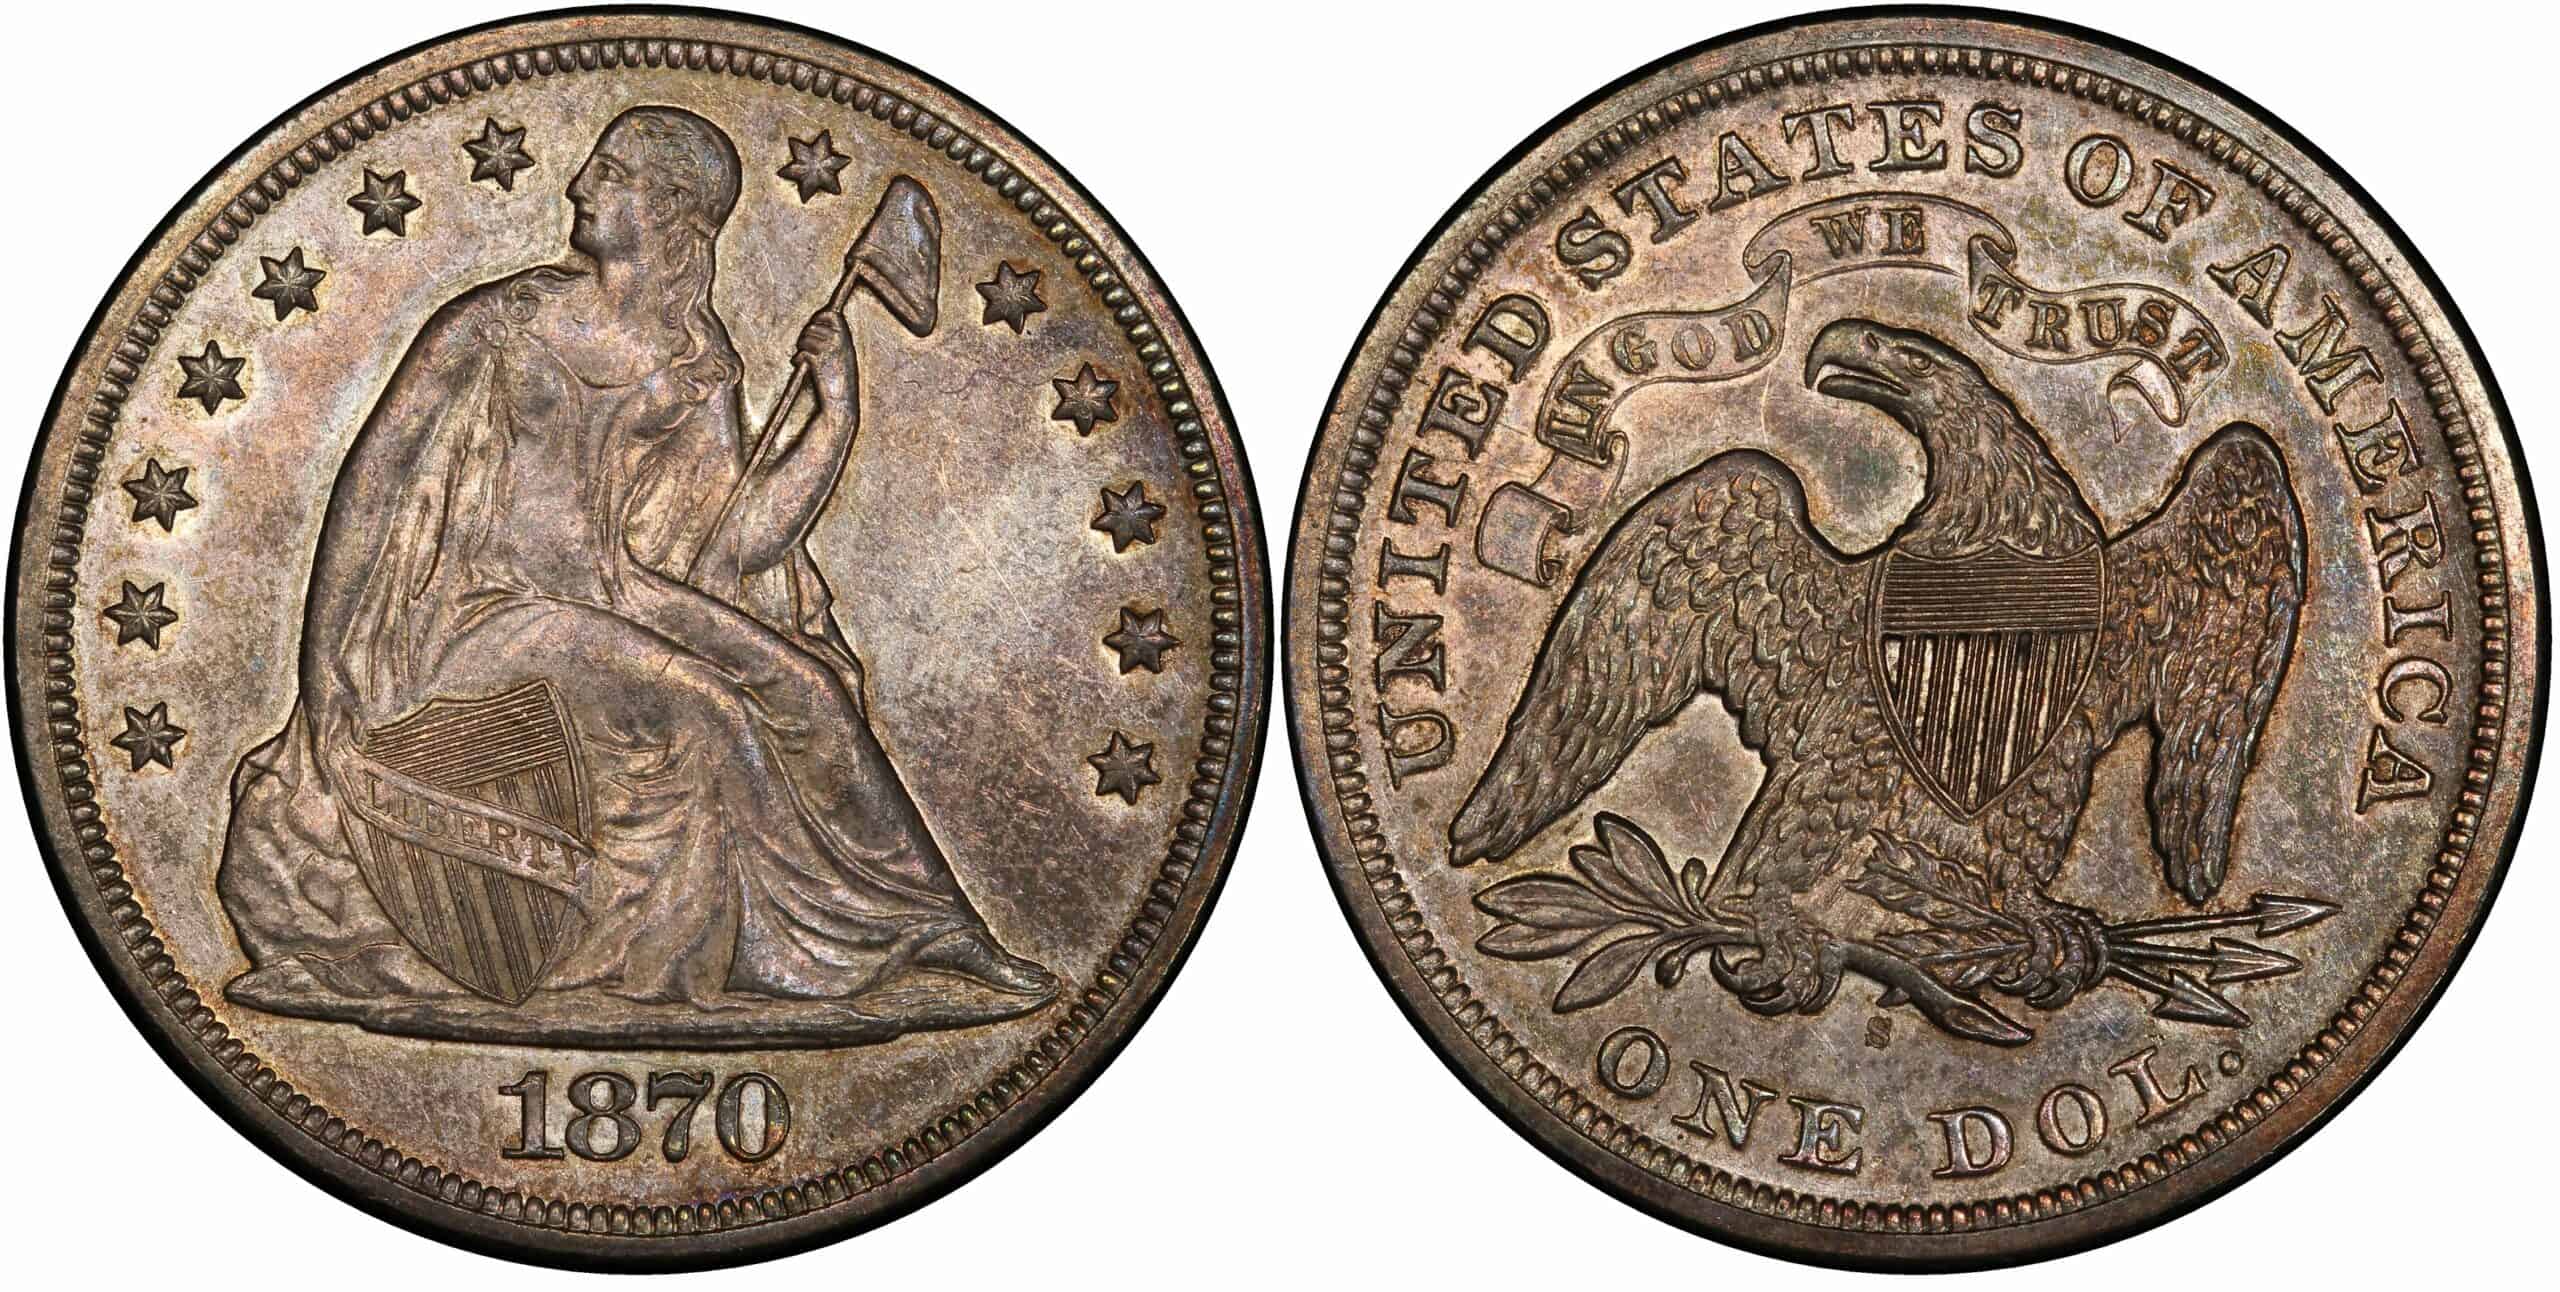 1870 S Seated Liberty Dollar, PCGS MS62